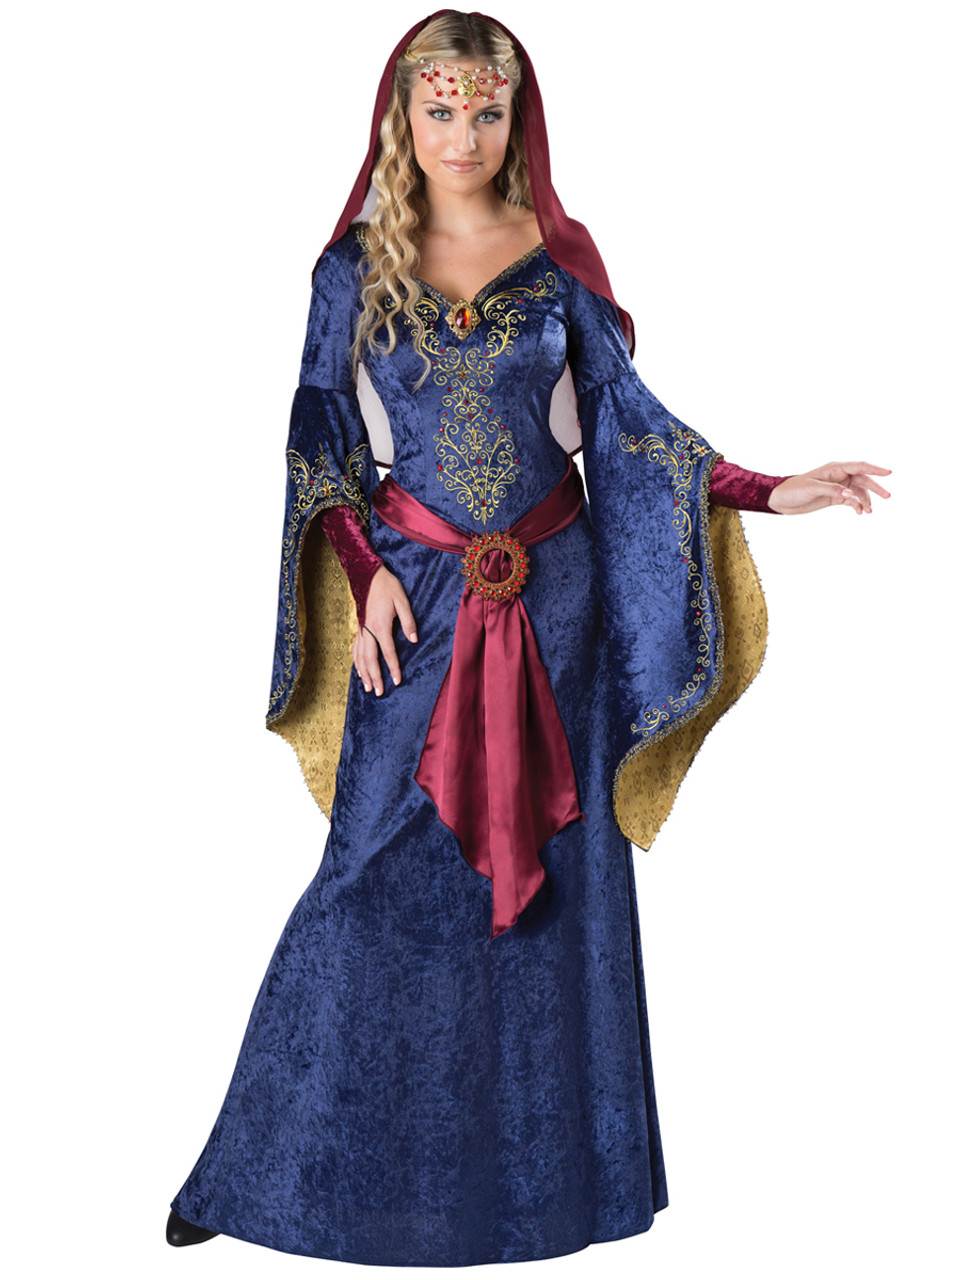 Details about   Maid Marion Woman's Deluxe Costume Large 